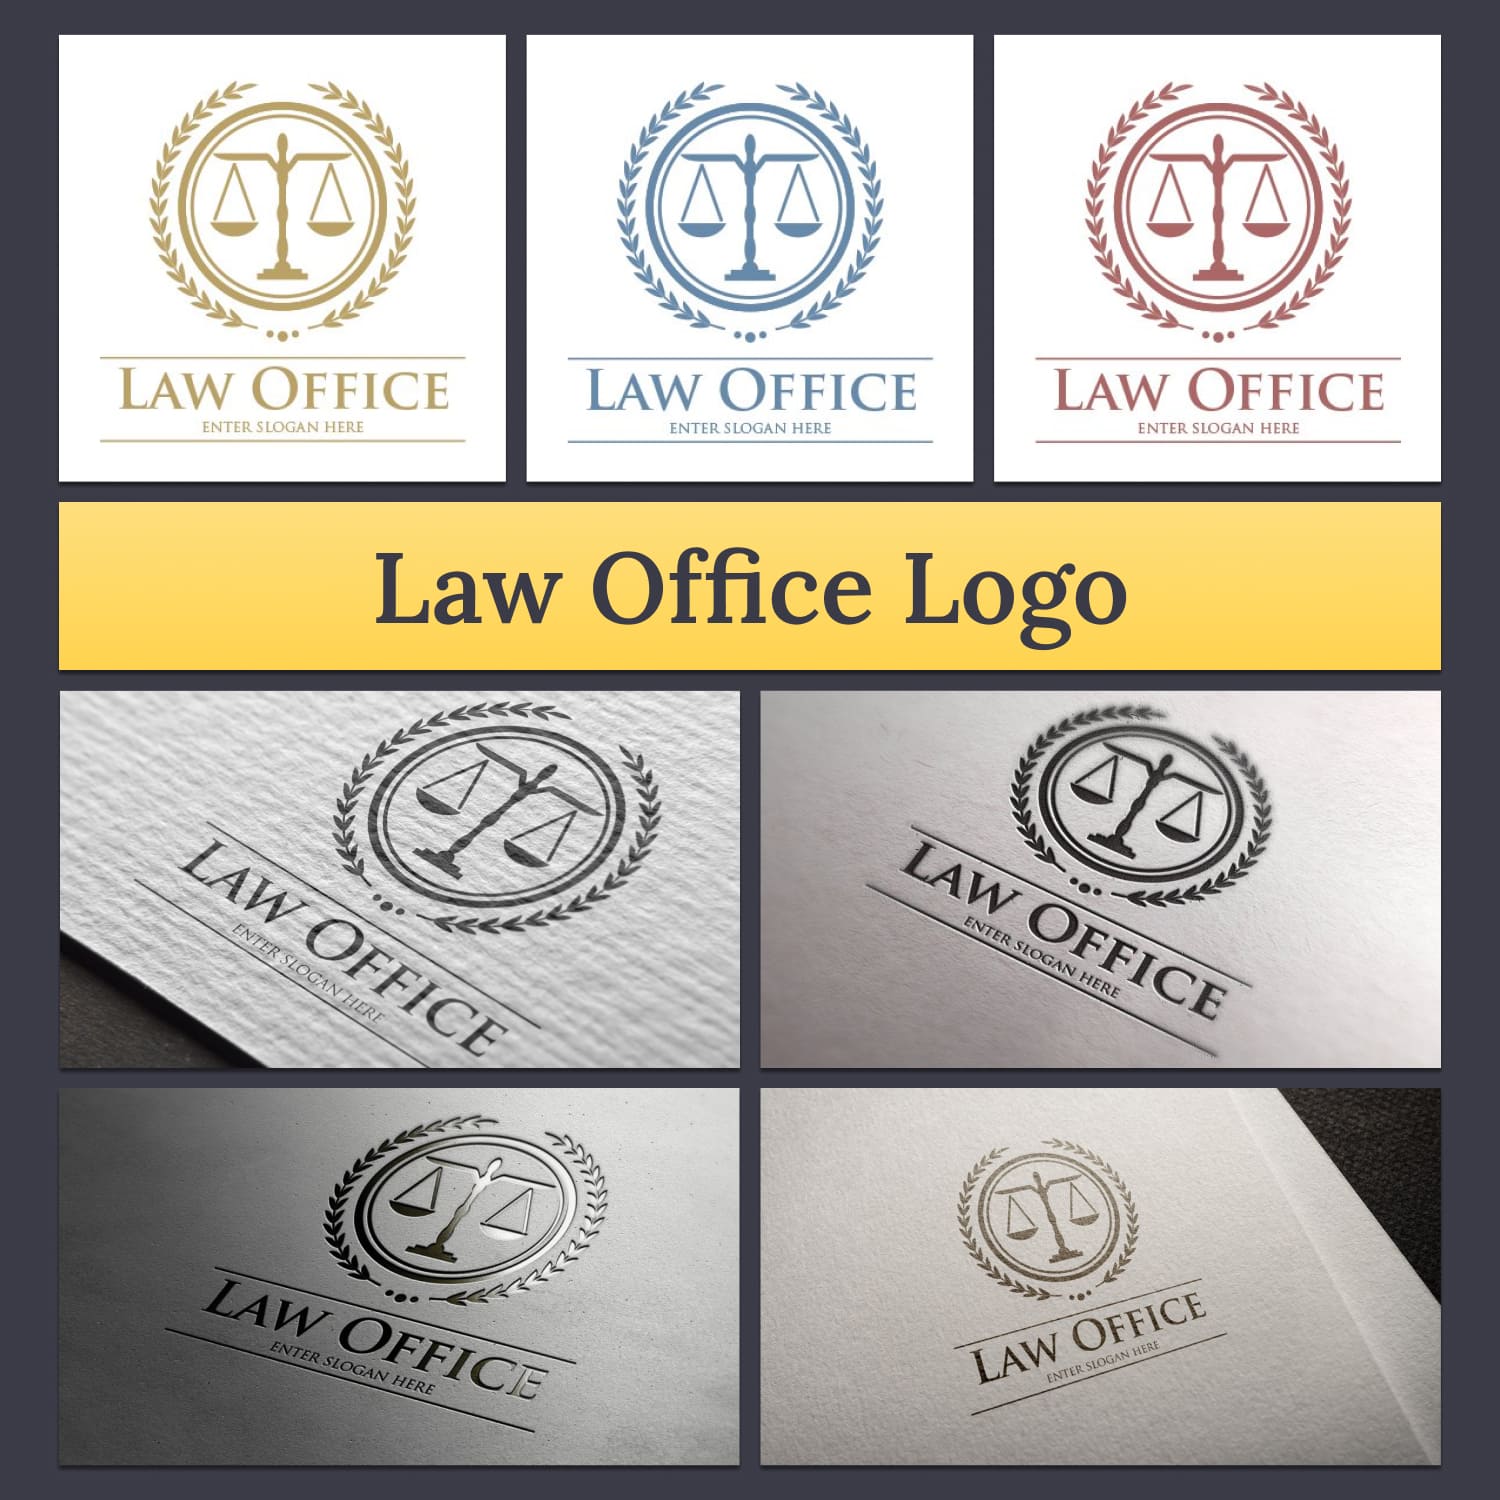 Law Office Logo Design Template cover image.